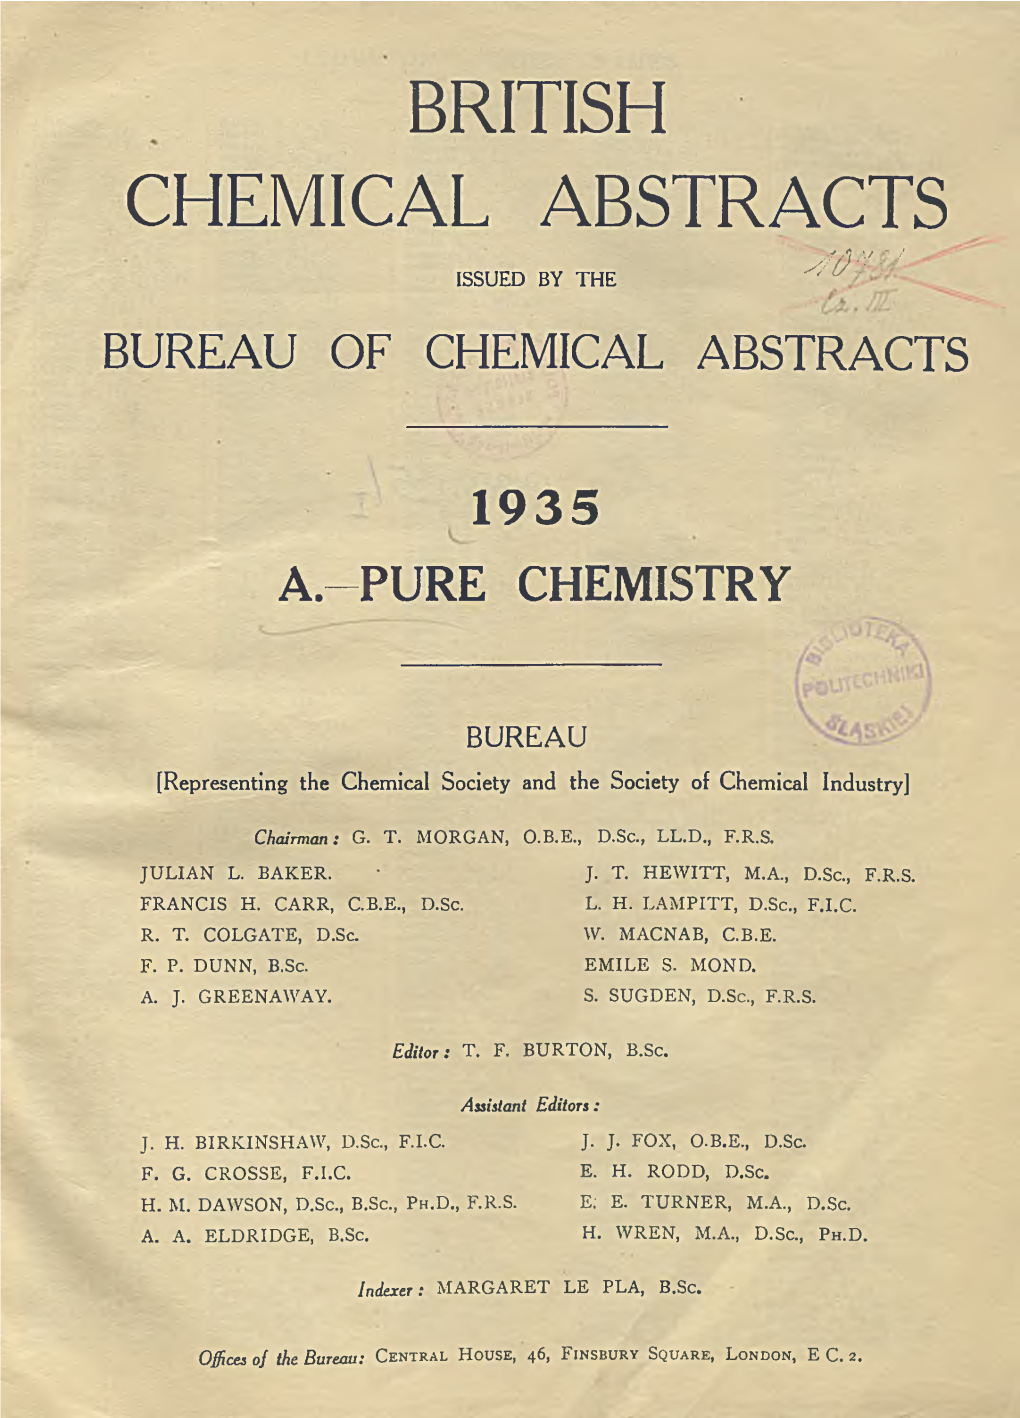 British Chemical Abstracts